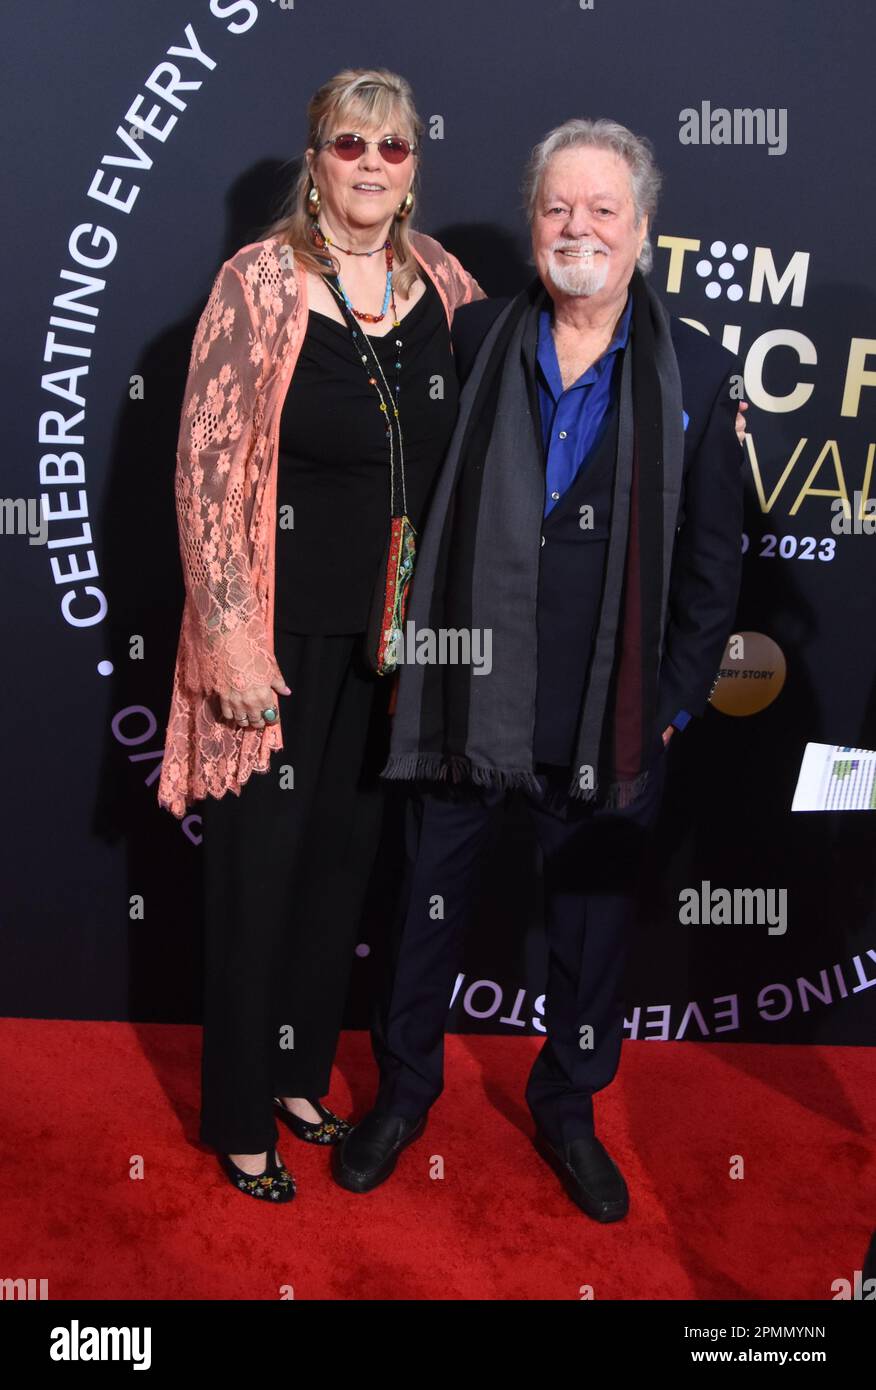 Los Angeles, California, USA 13th April 2023 Actor Russ Tamblyn and wife Bonnie Murray Tamblyn attend Opening Night of 2023 TCM Classic Film Festival at TCL Chinese Theatre on April 13, 2023 in Los Angeles, California, USA. Photo by Barry King/Alamy Live News Stock Photo